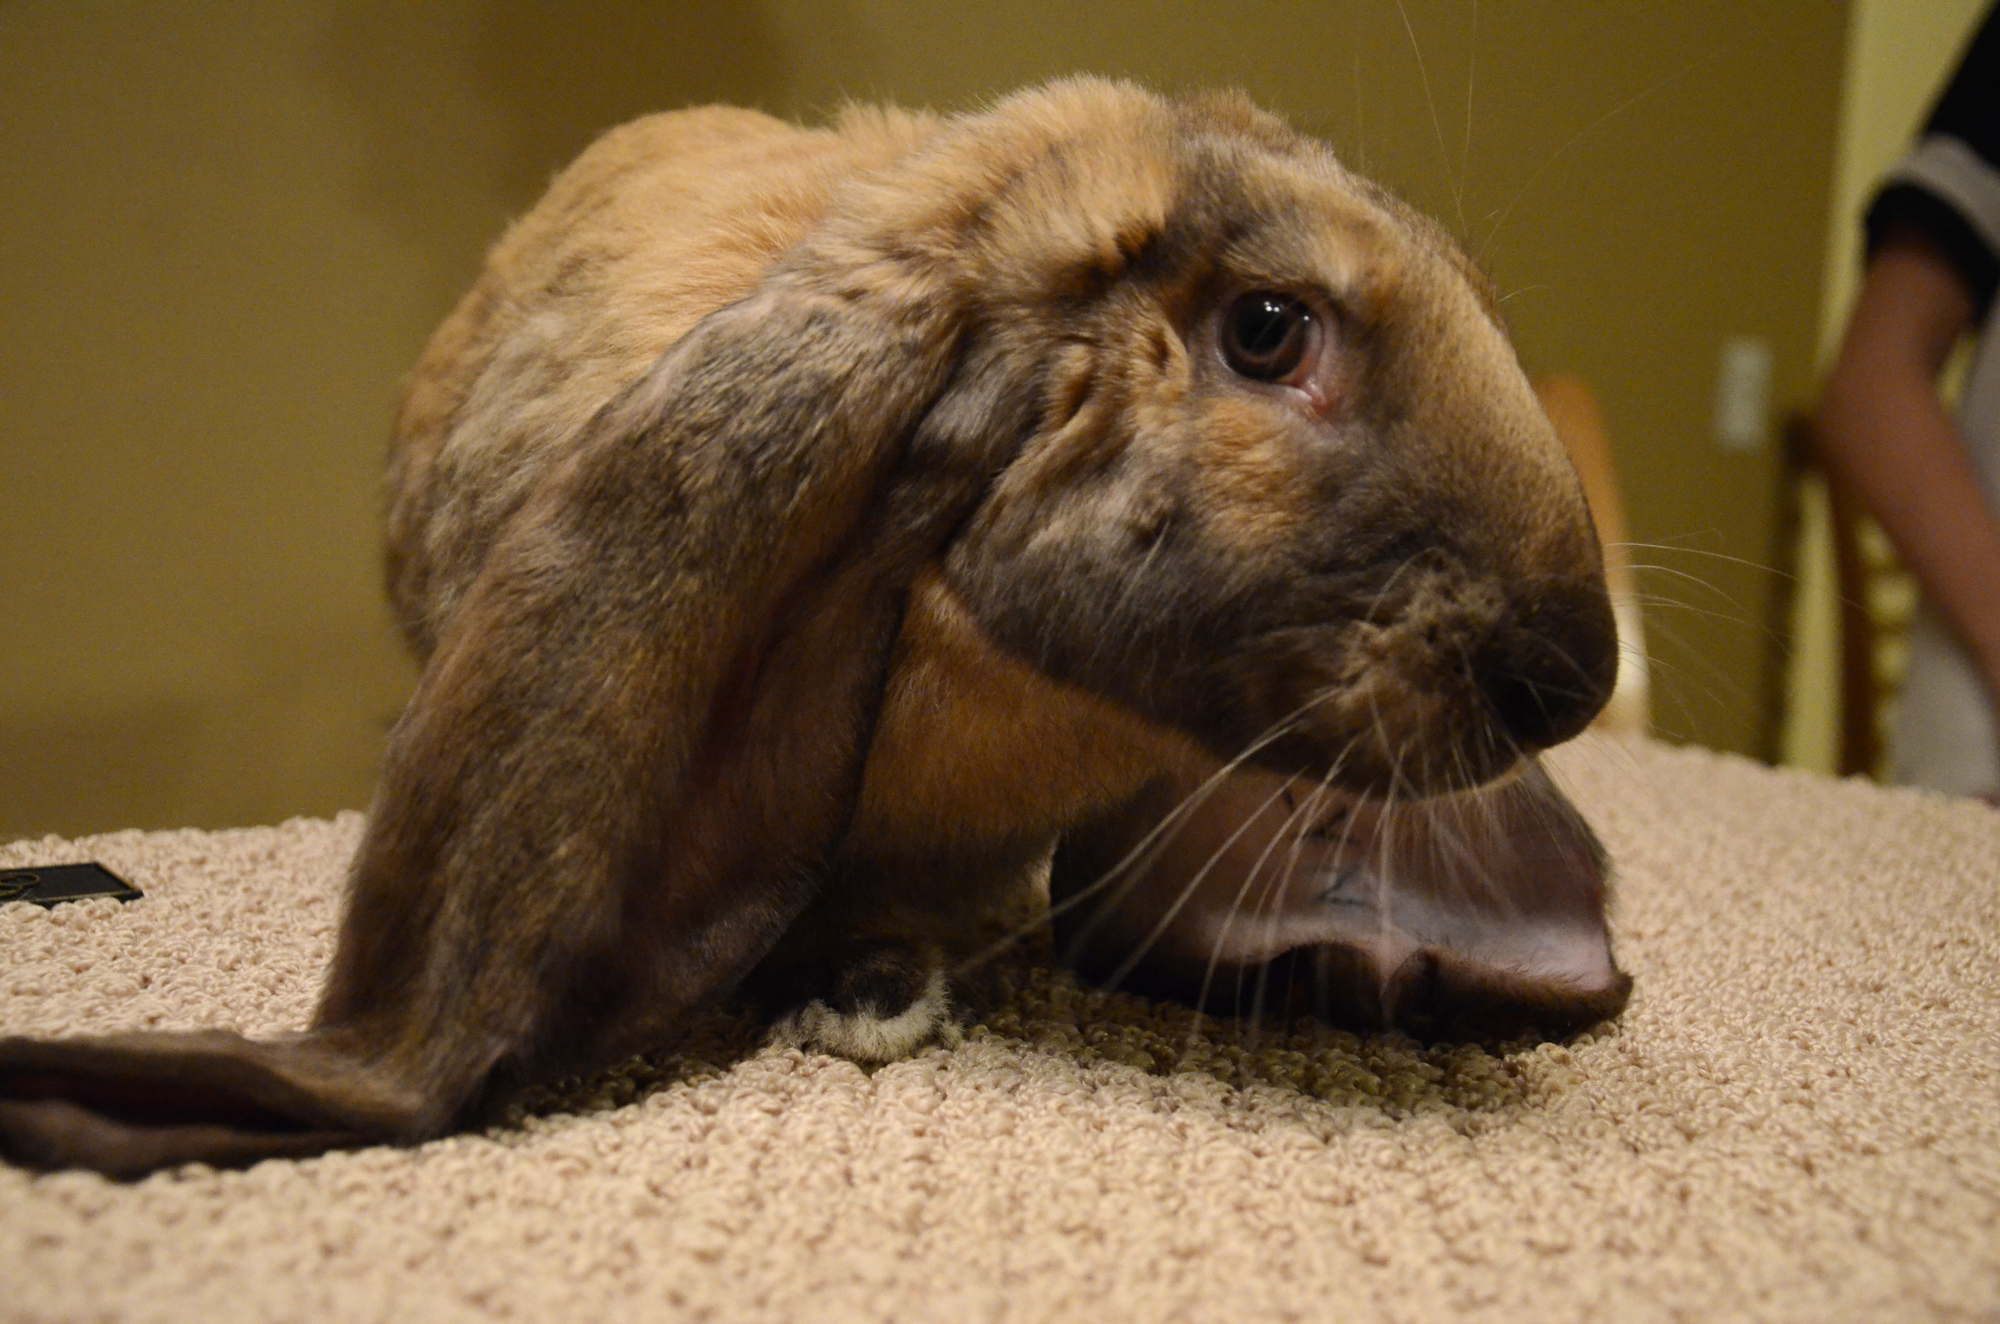 Flynn is an English Lop, a breed famous for long, floppy ears and large size.